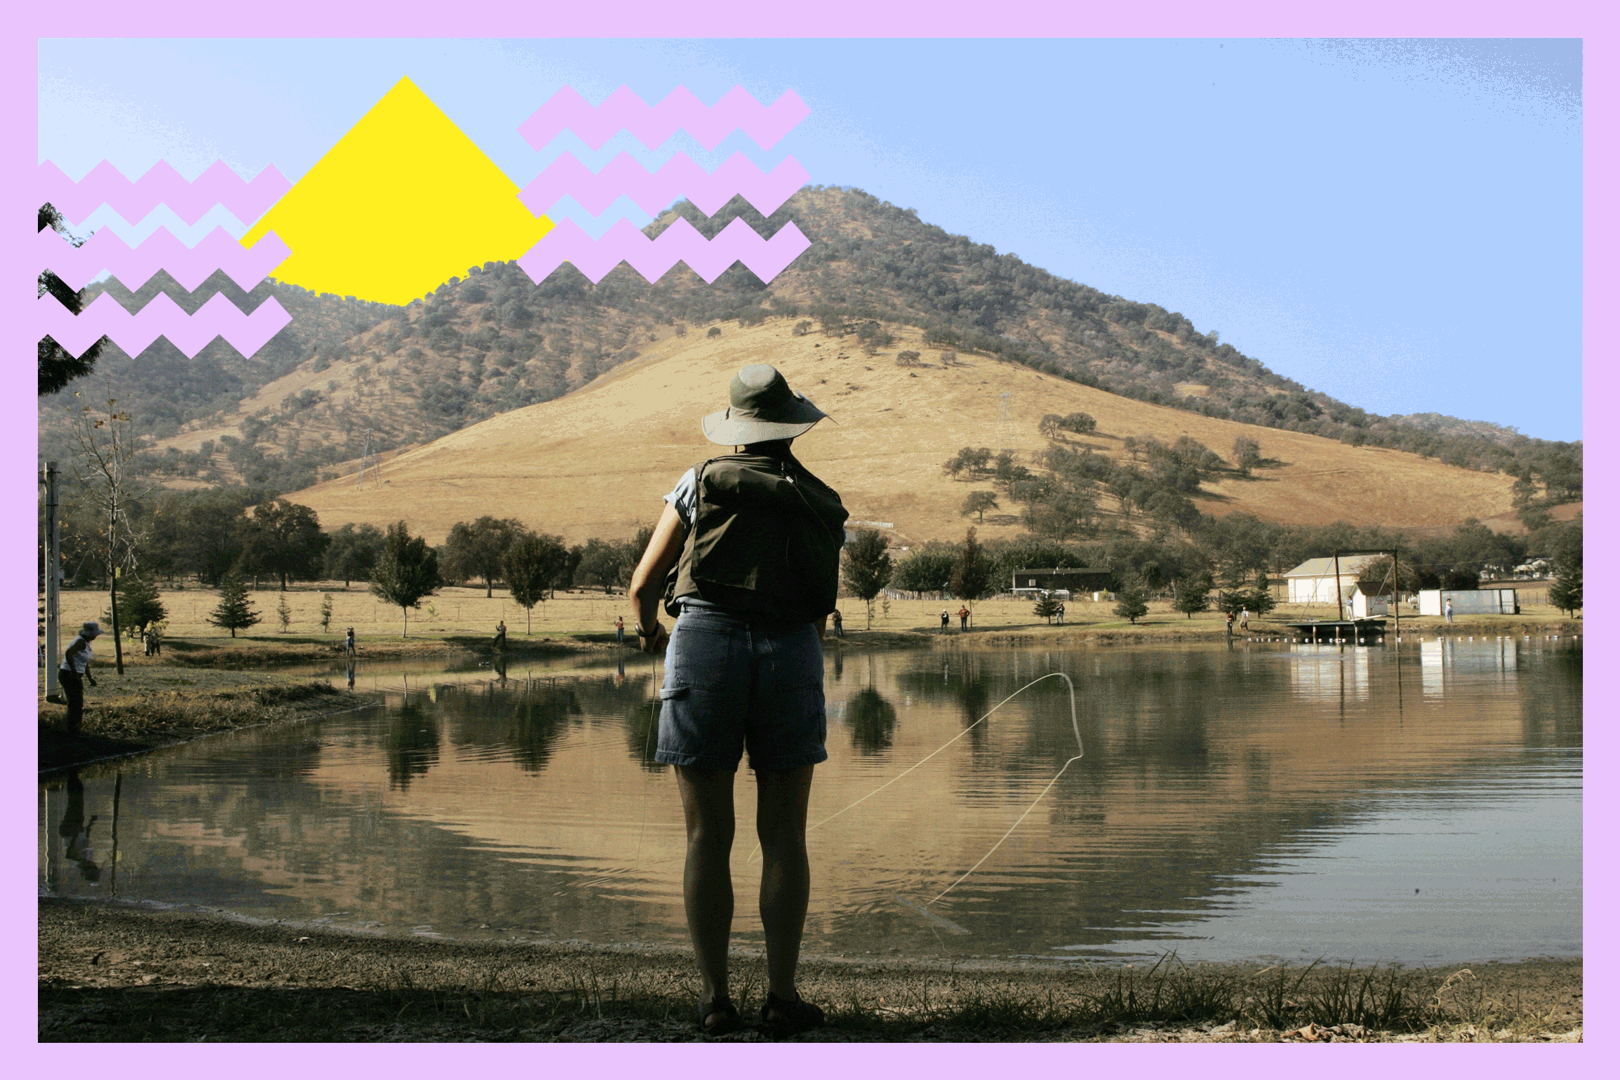 A person in silhouette fly-fishing with a body of water in front of them and a hillside in the distance